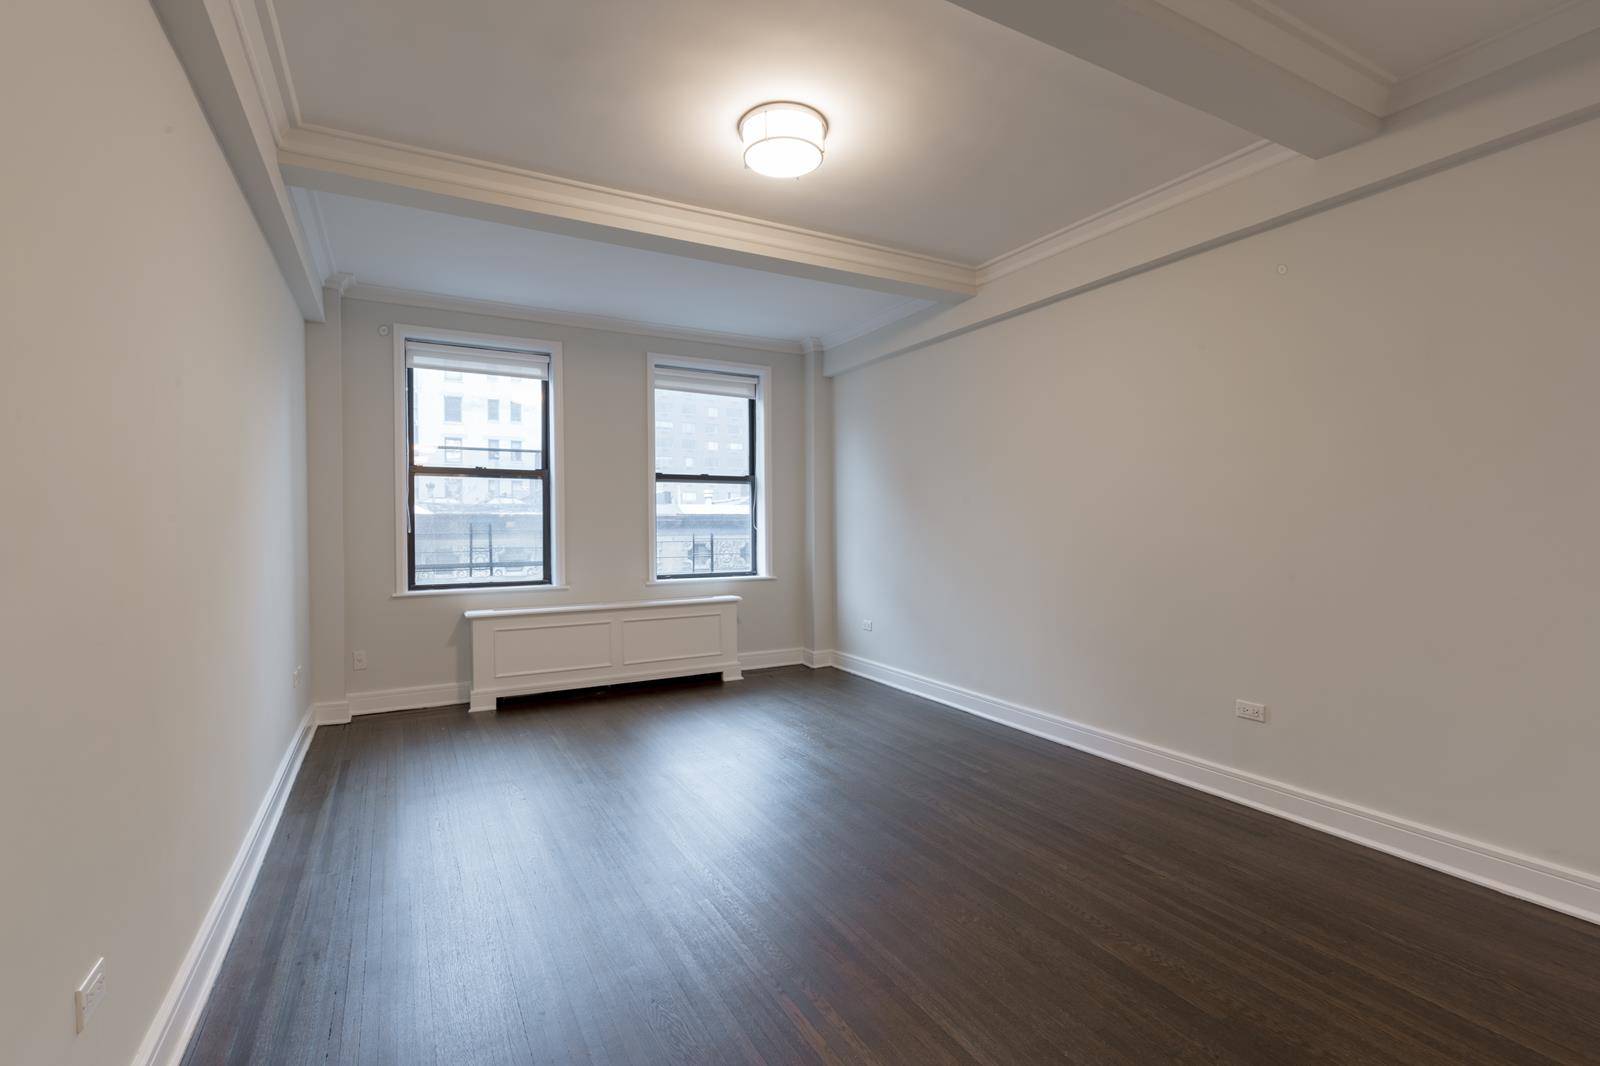 No fee, spacious 2 bedroom 2 bath apartment in the heart of the upper west side.